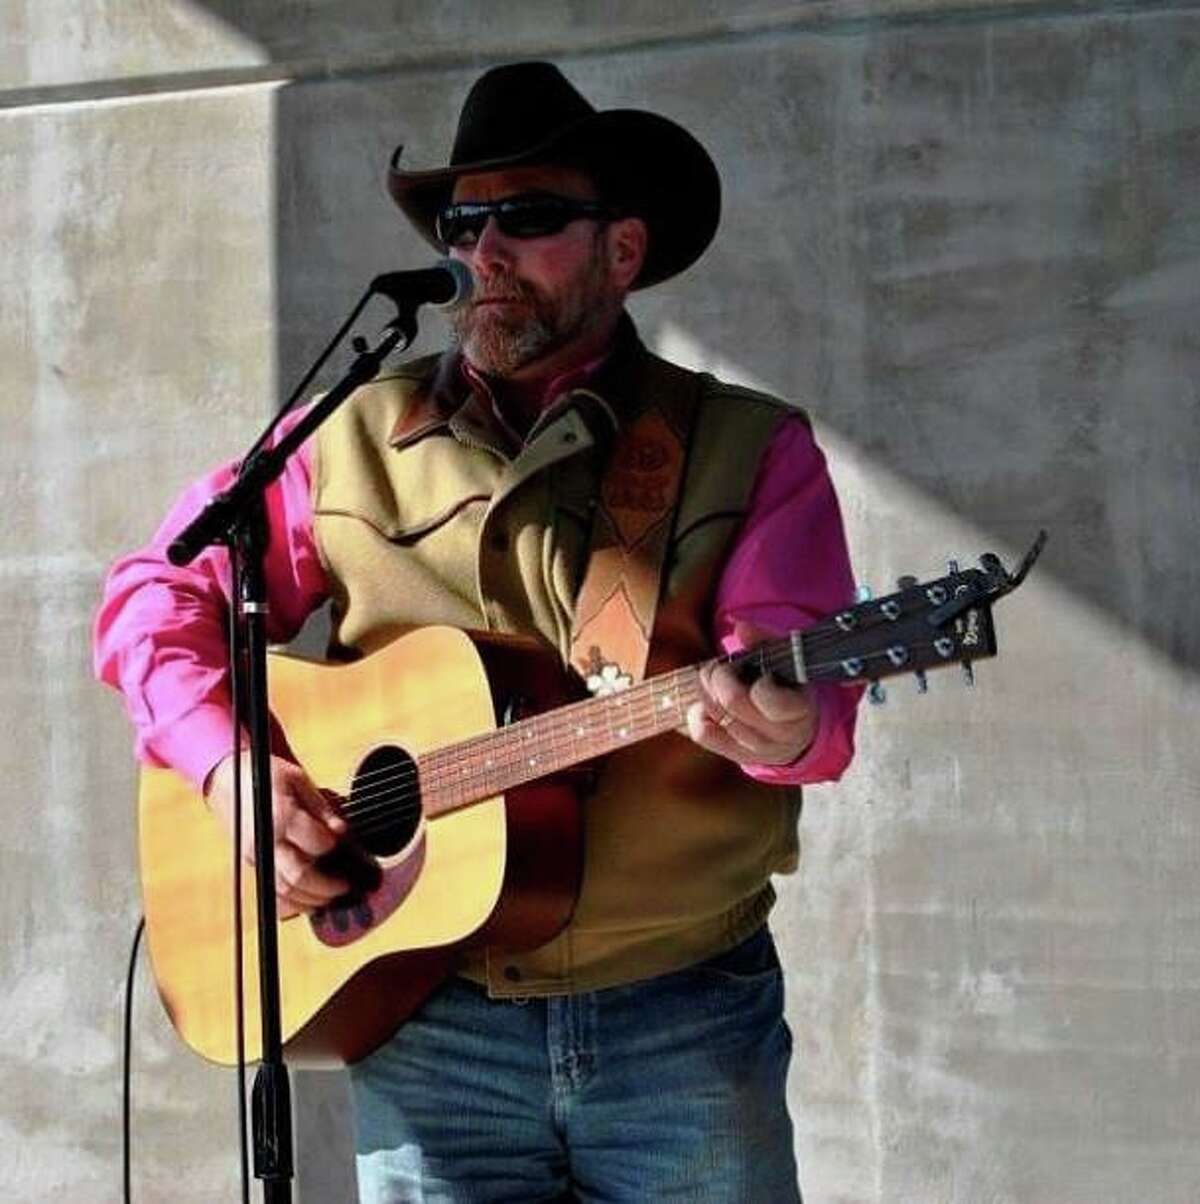 McMahon writes Christian country music and performs locally. He has several albums out.